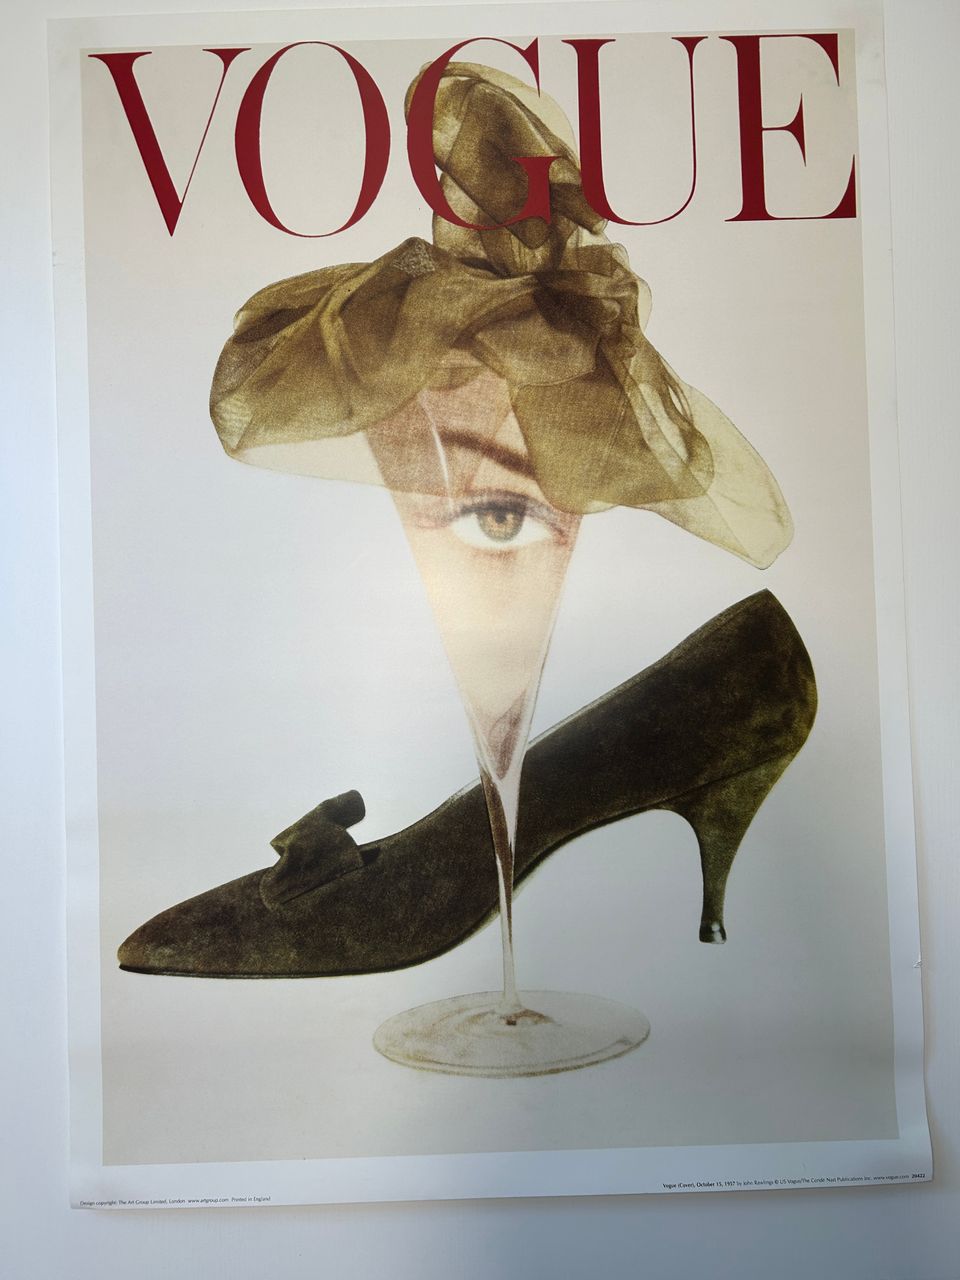 Vogue (Cover), October 15, 1957 by John Rawlings - Vintage / Retro Print